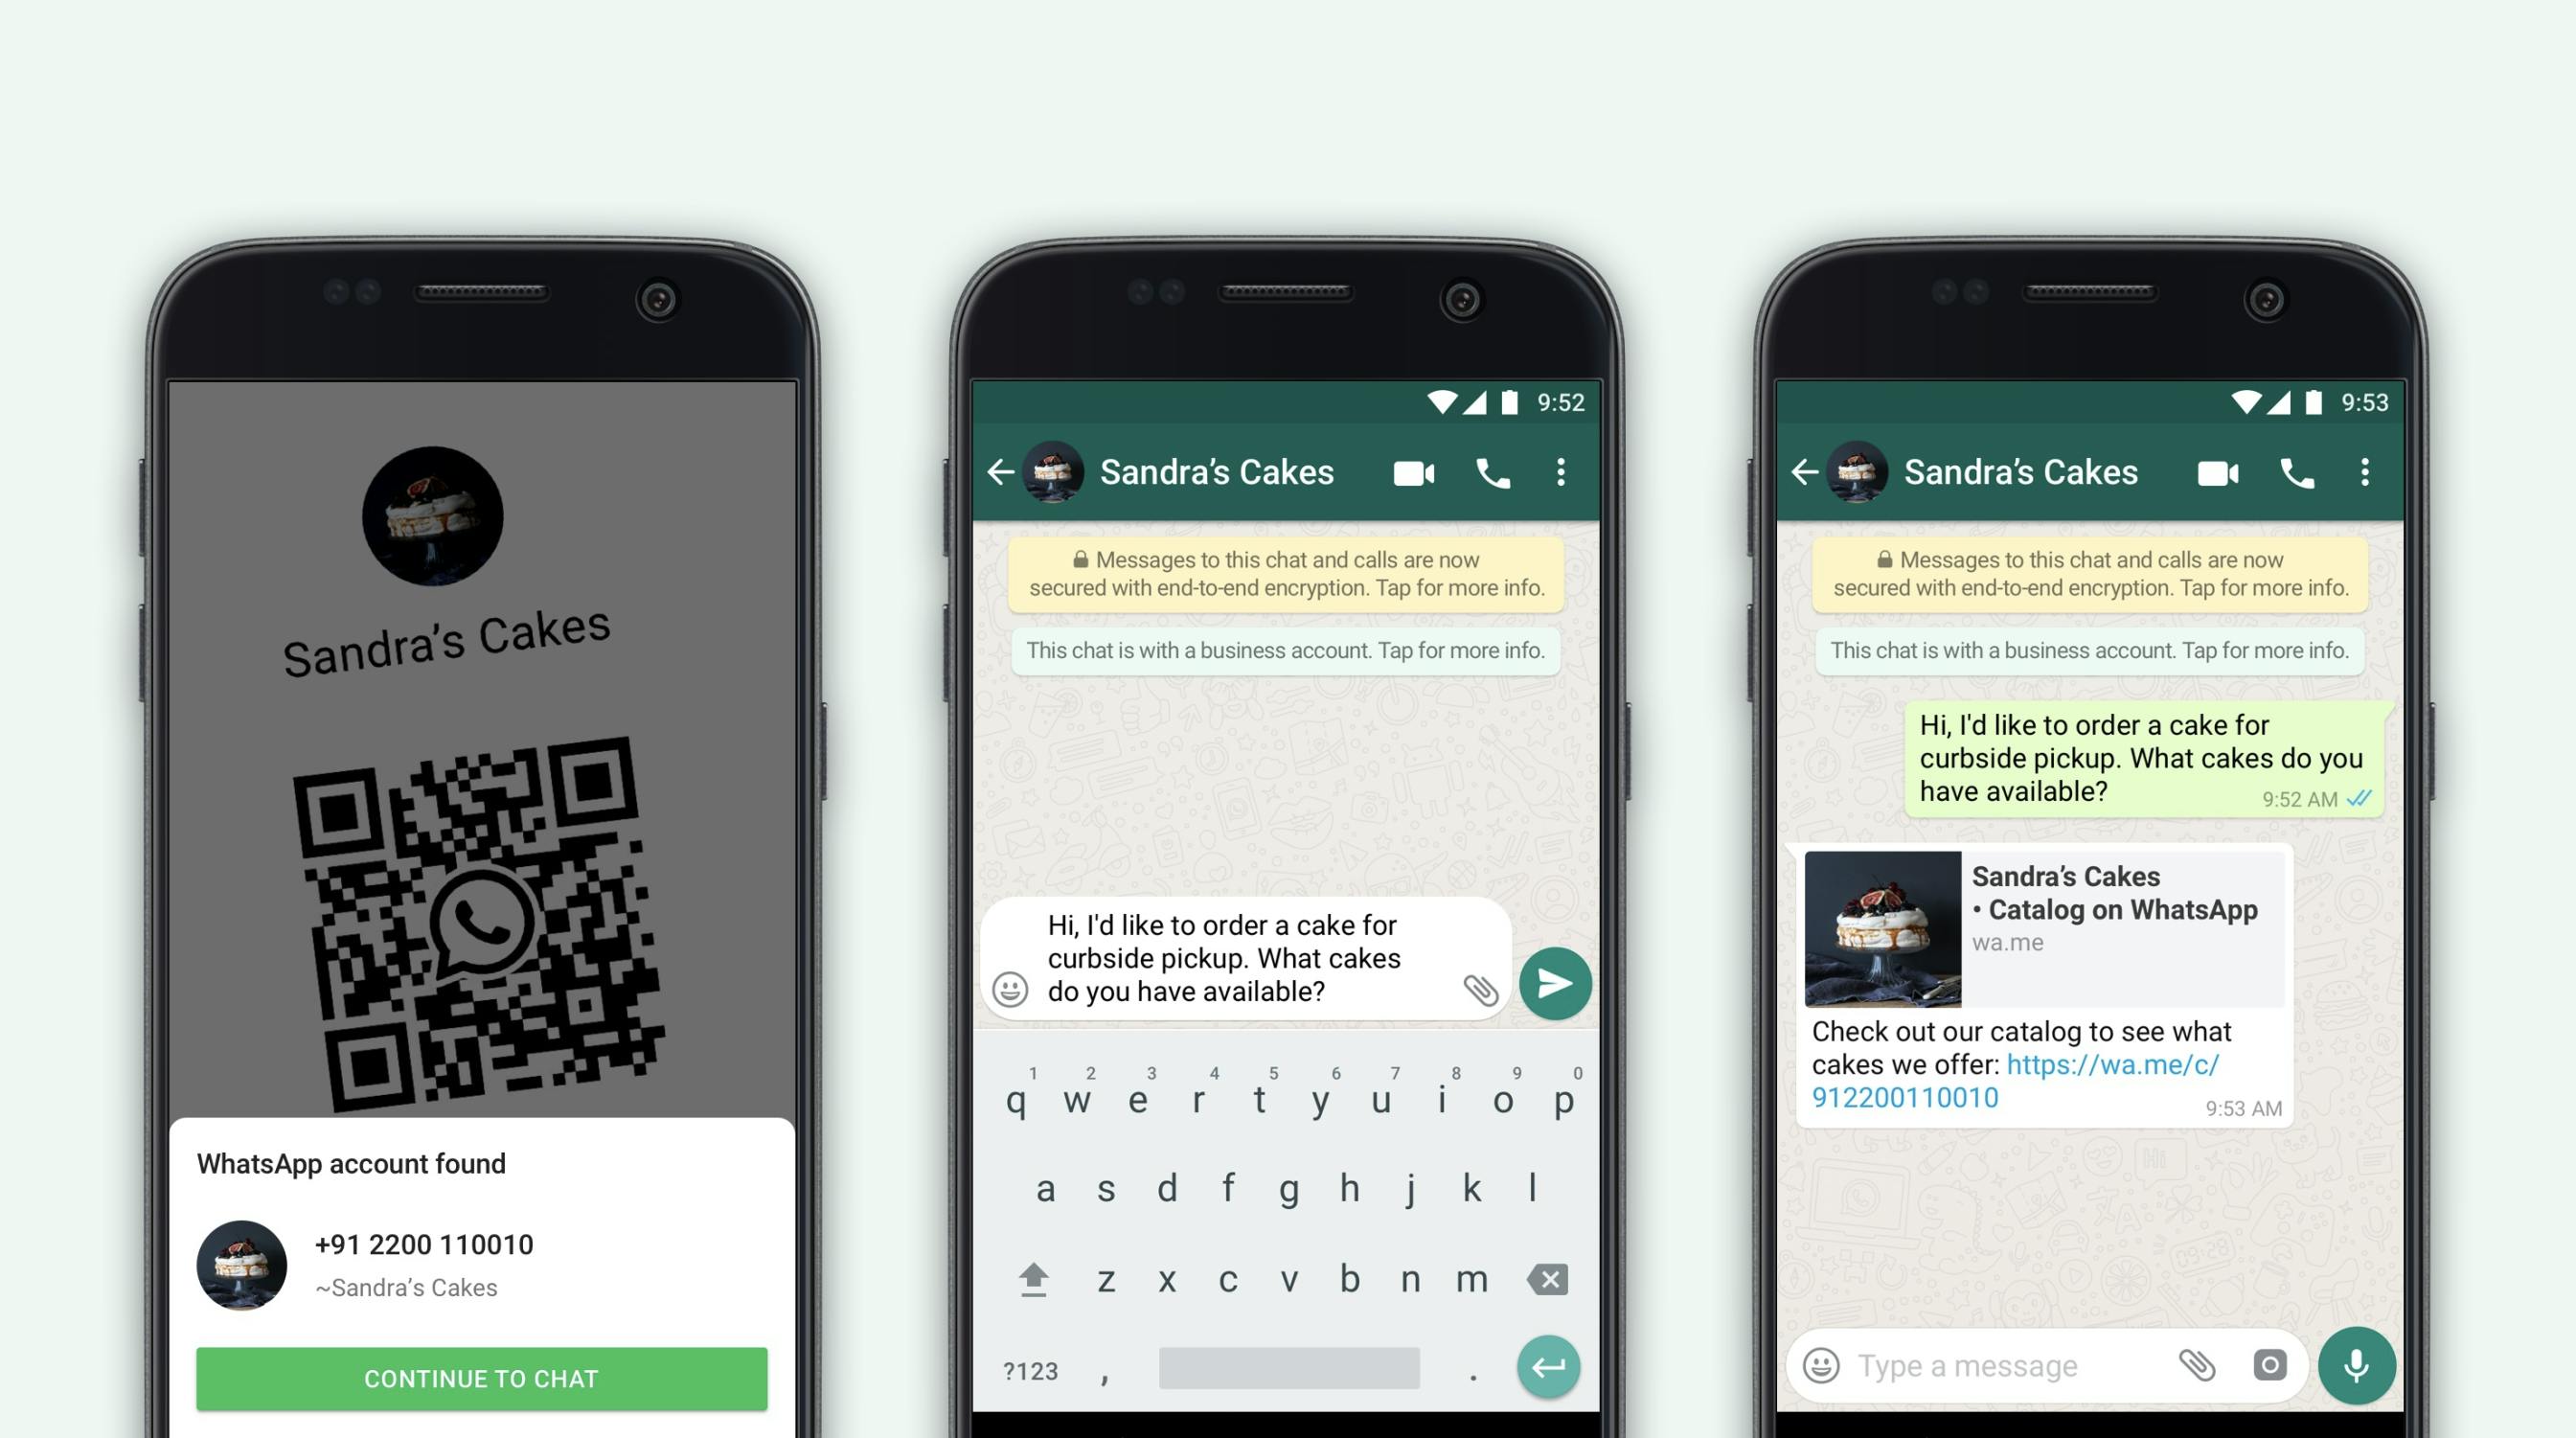 Example of chatting with a WhatsApp Business account by scanning a QR code